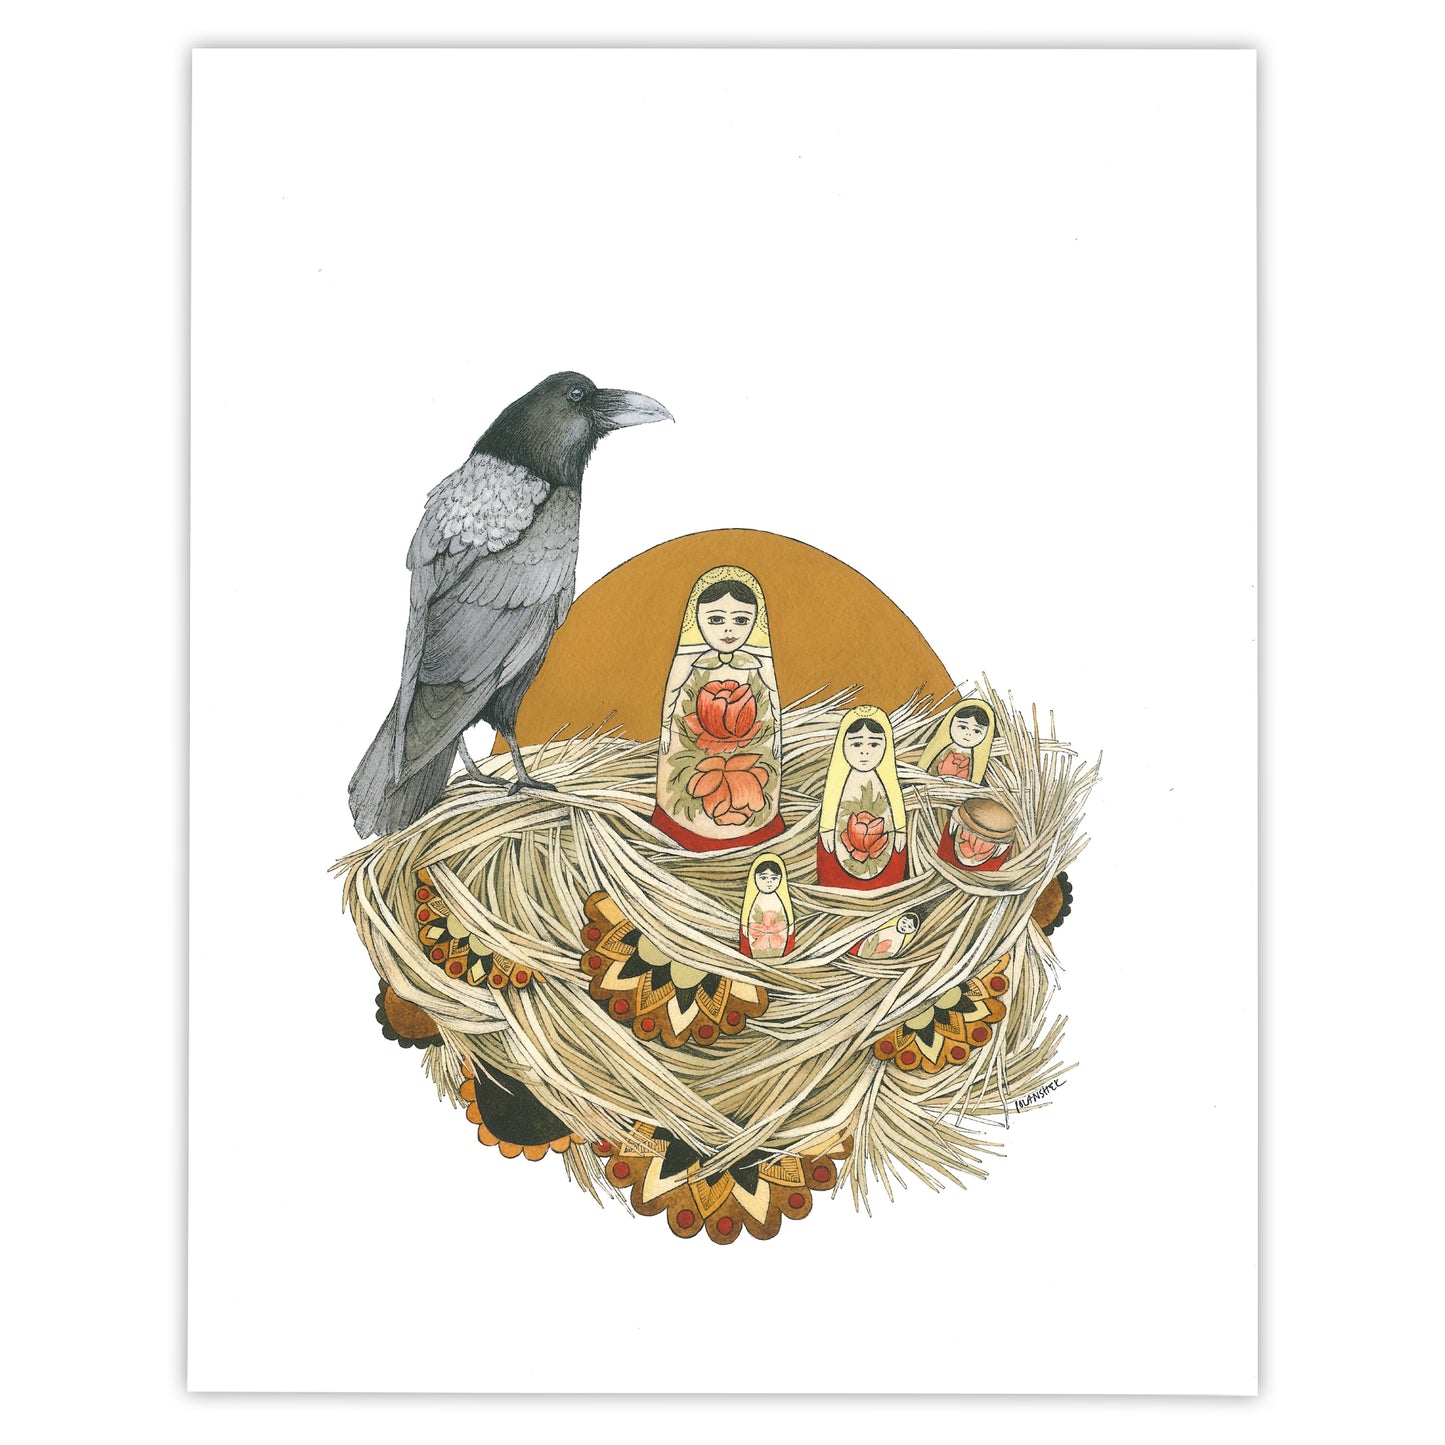 Collector: The Nesting Dolls Print